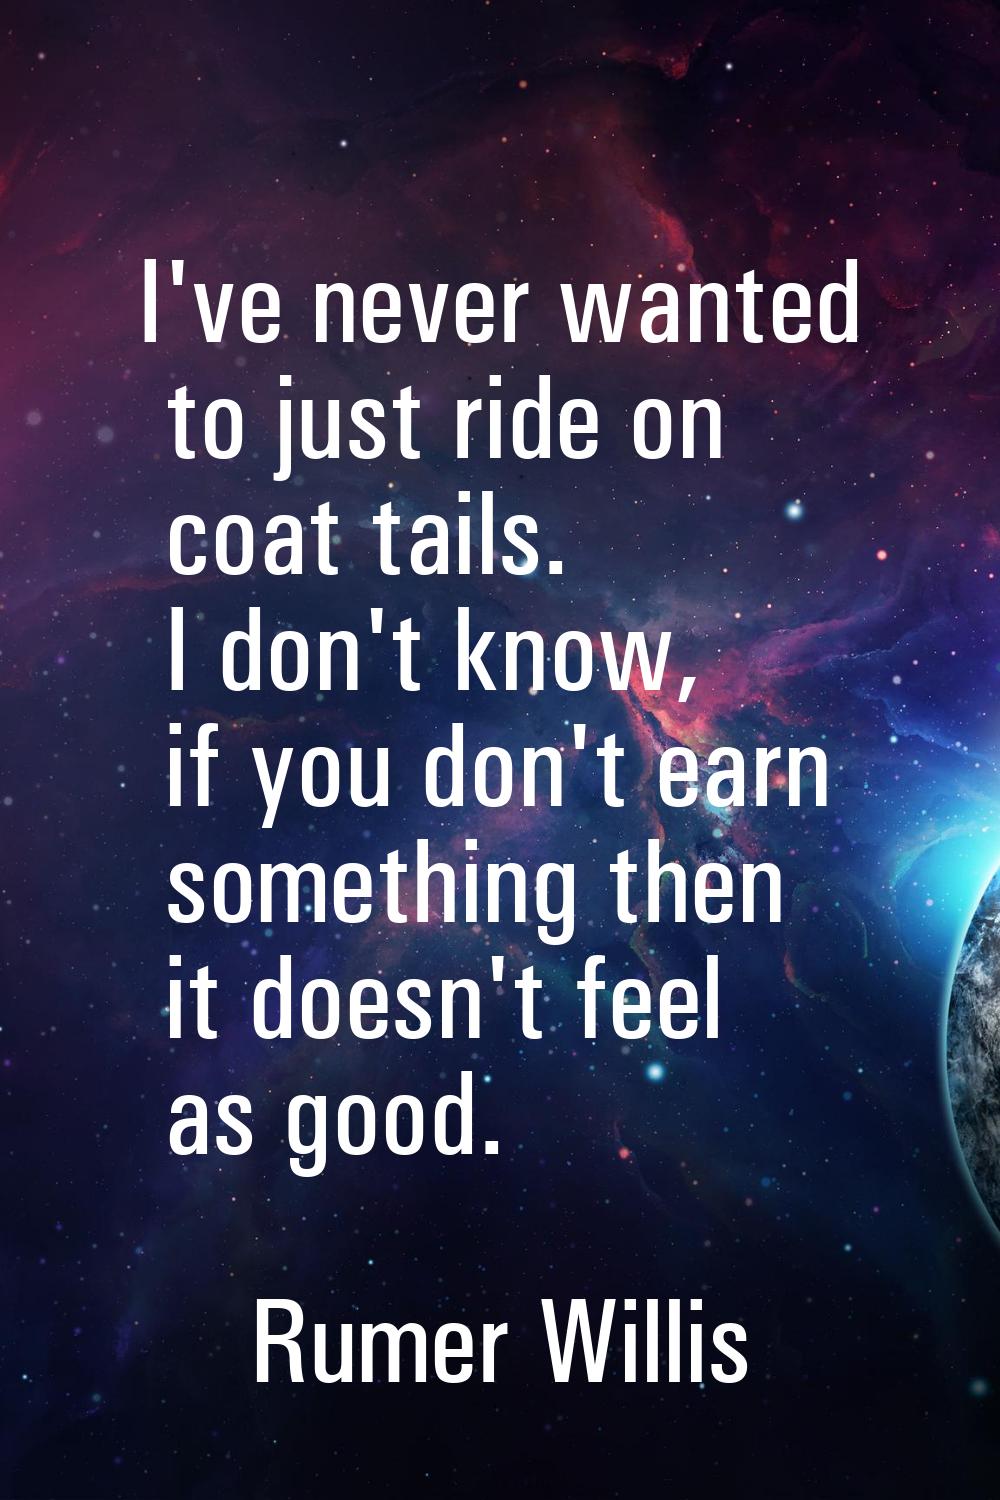 I've never wanted to just ride on coat tails. I don't know, if you don't earn something then it doe